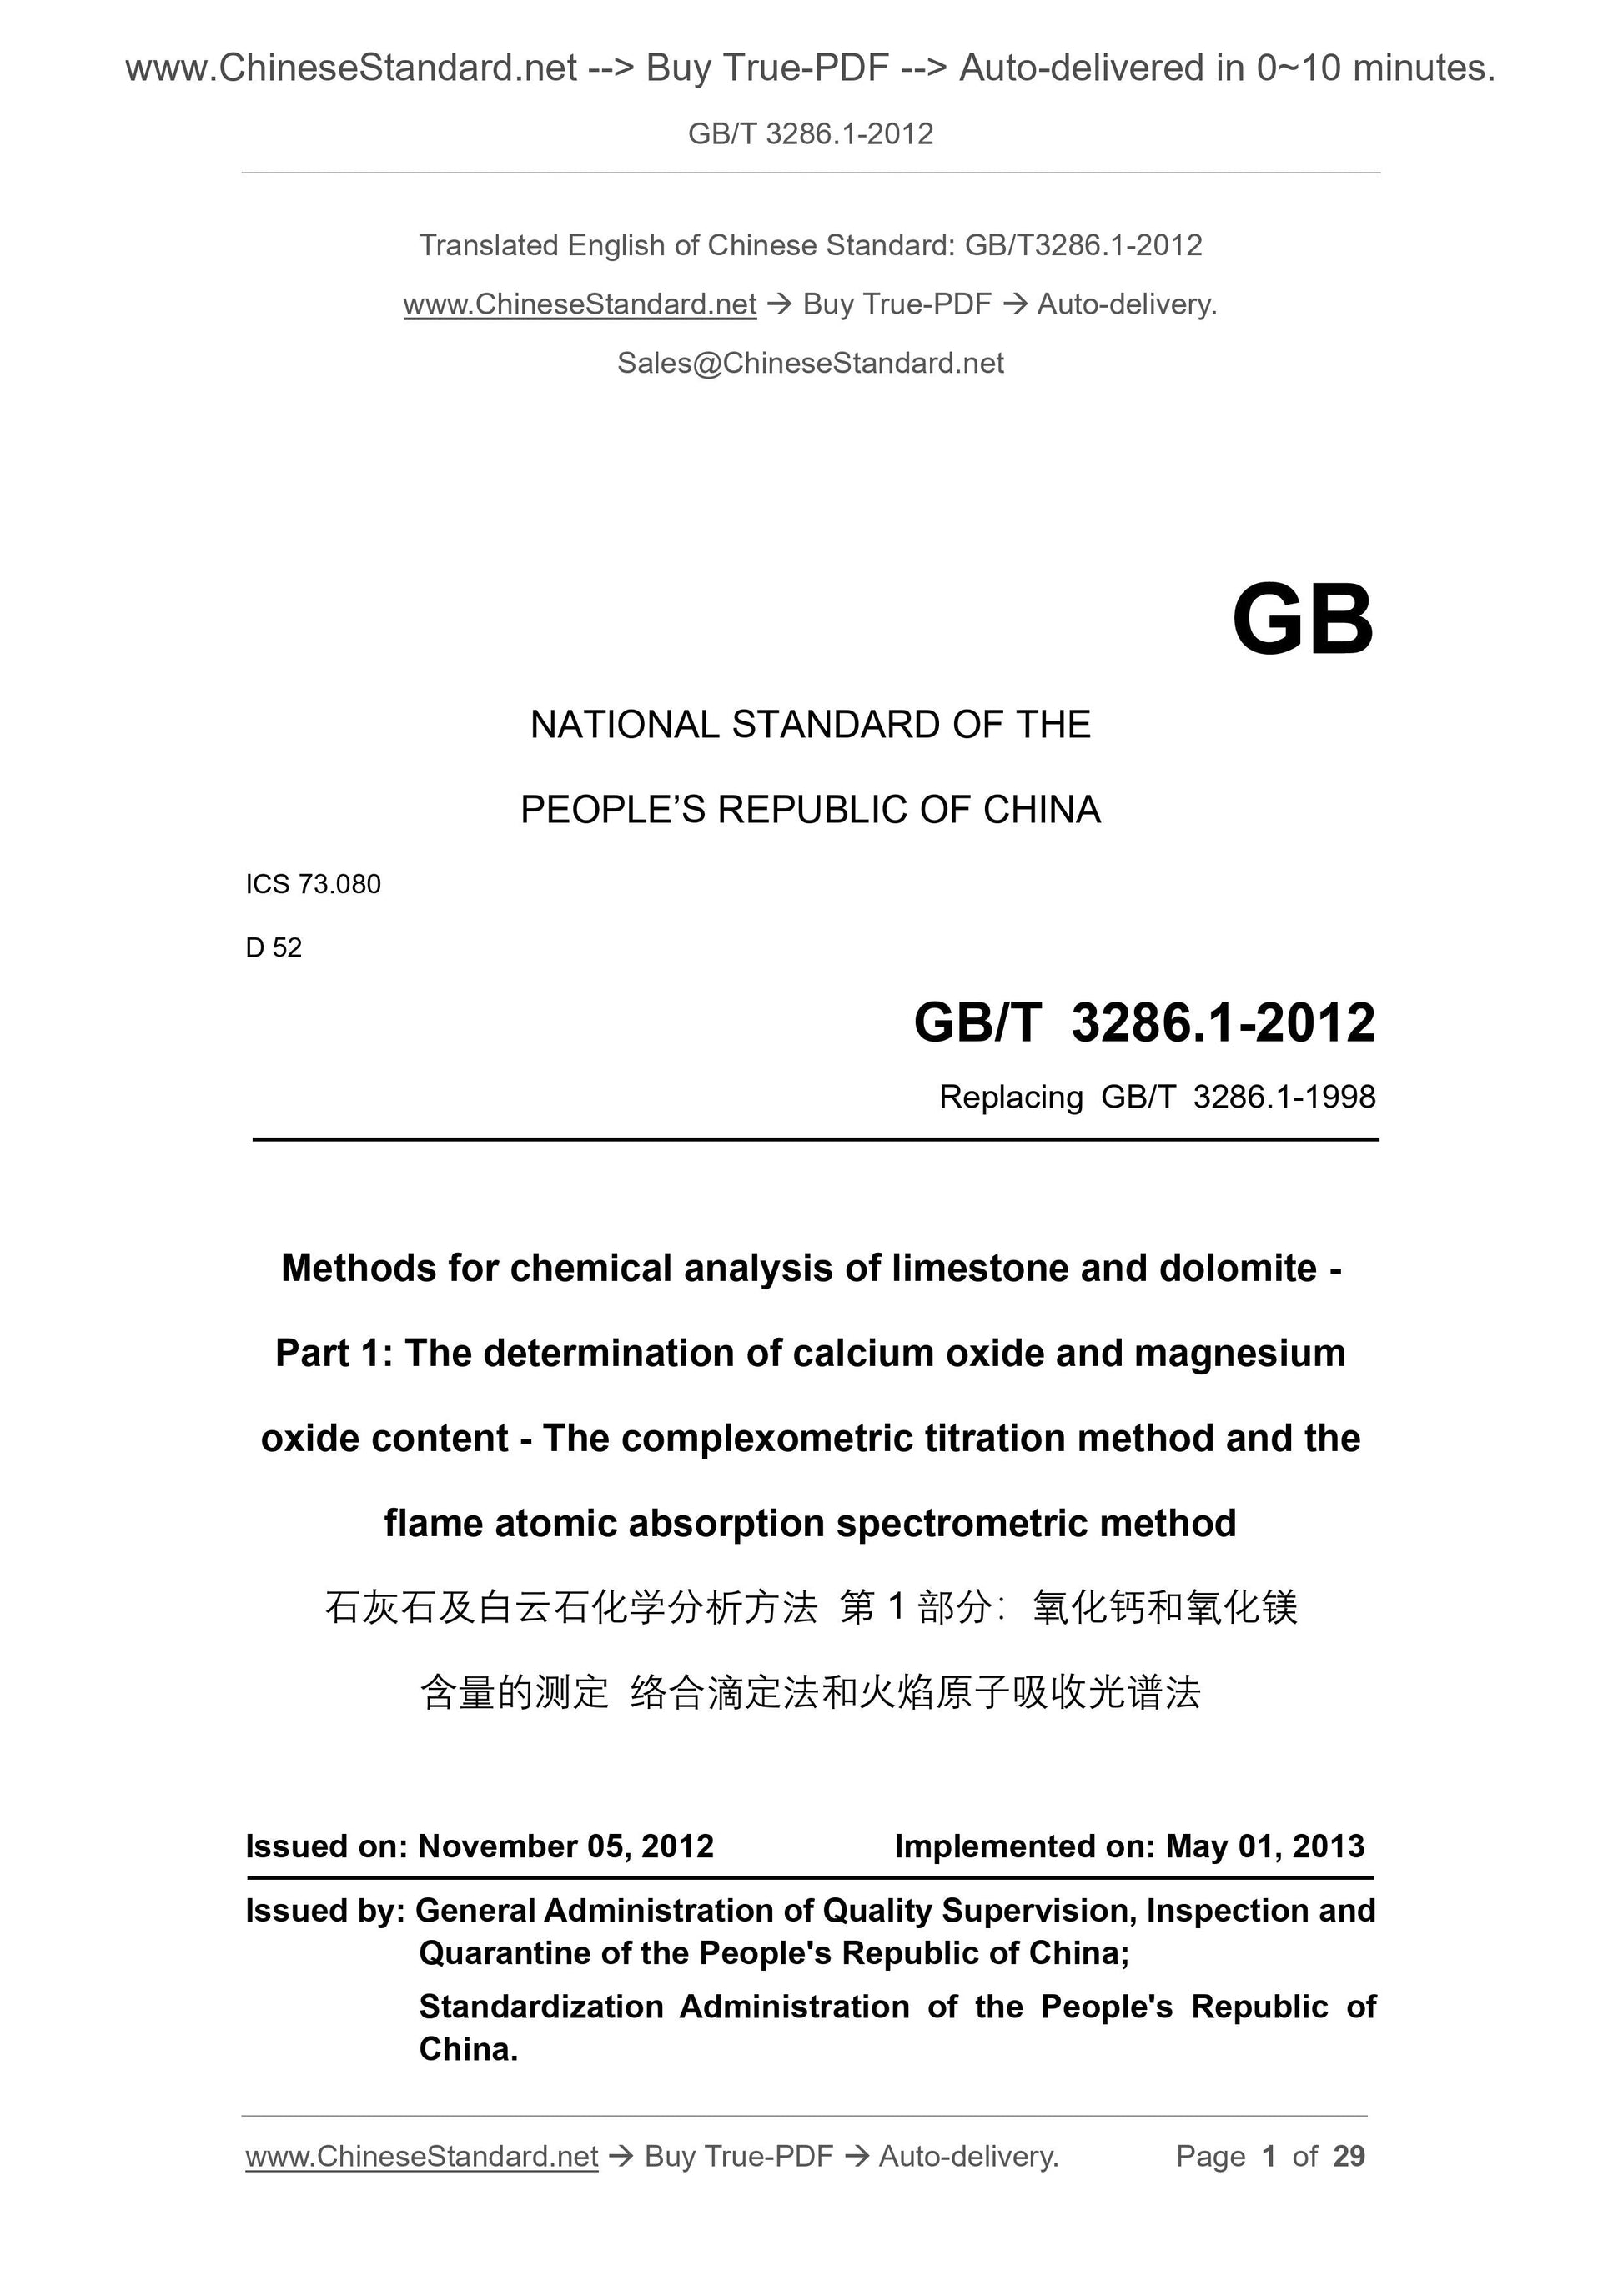 GB/T 3286.1-2012 Page 1